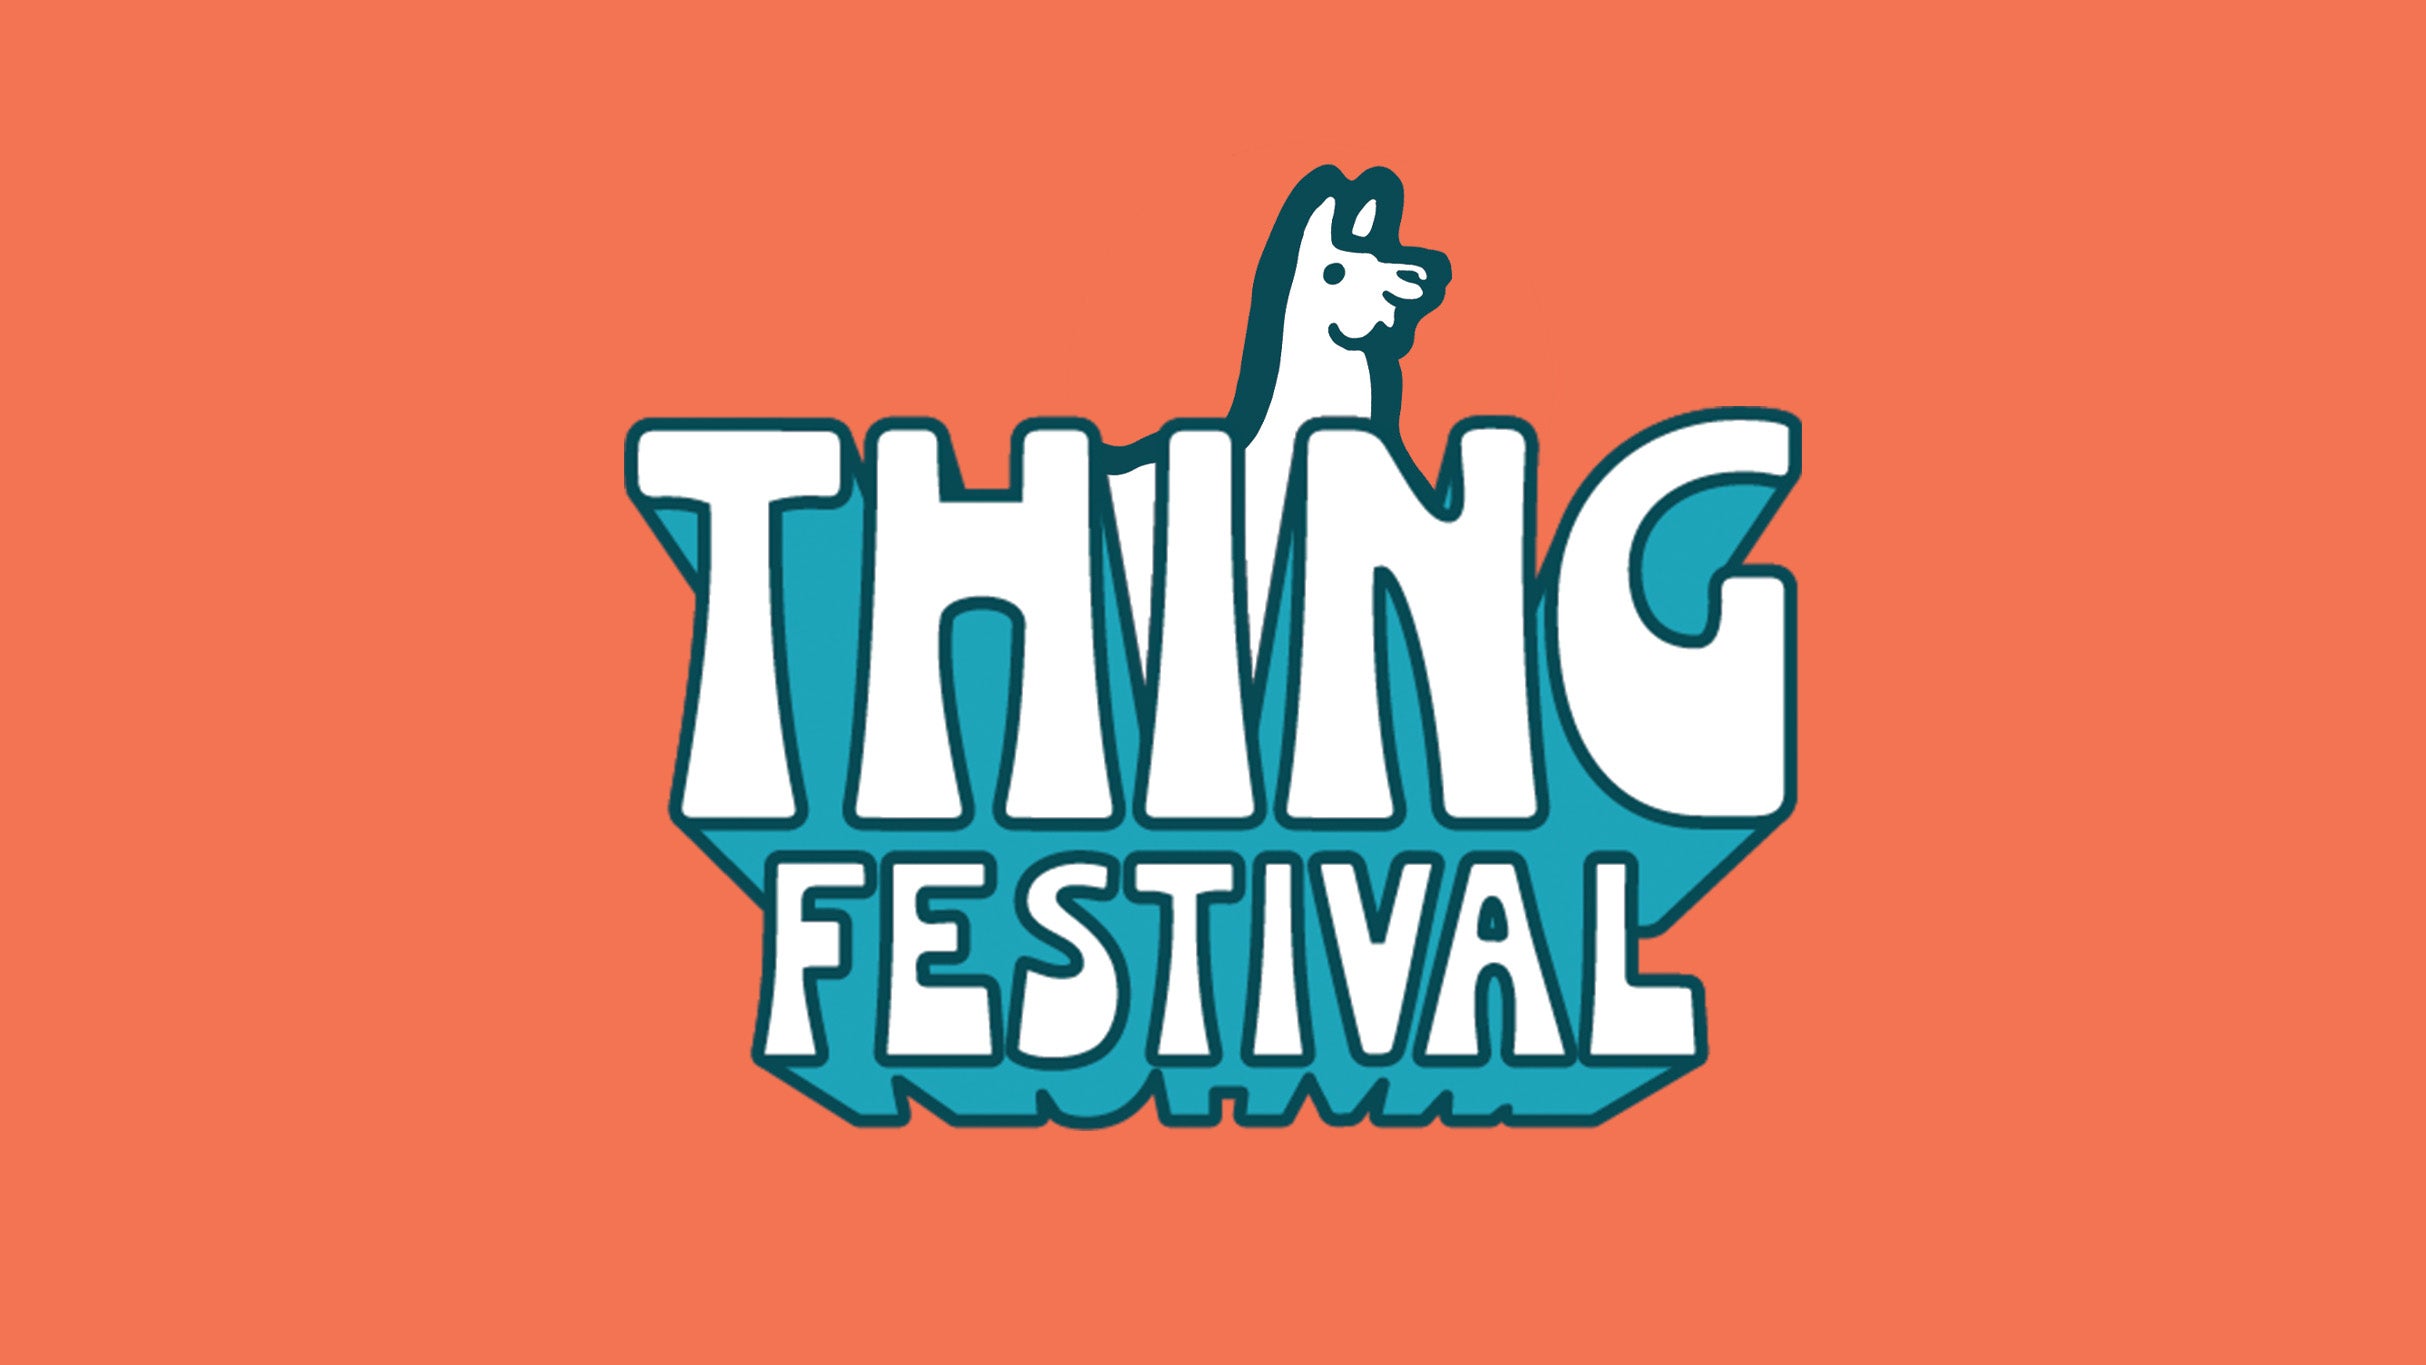 working presale password for THING Festival tickets in Carnation